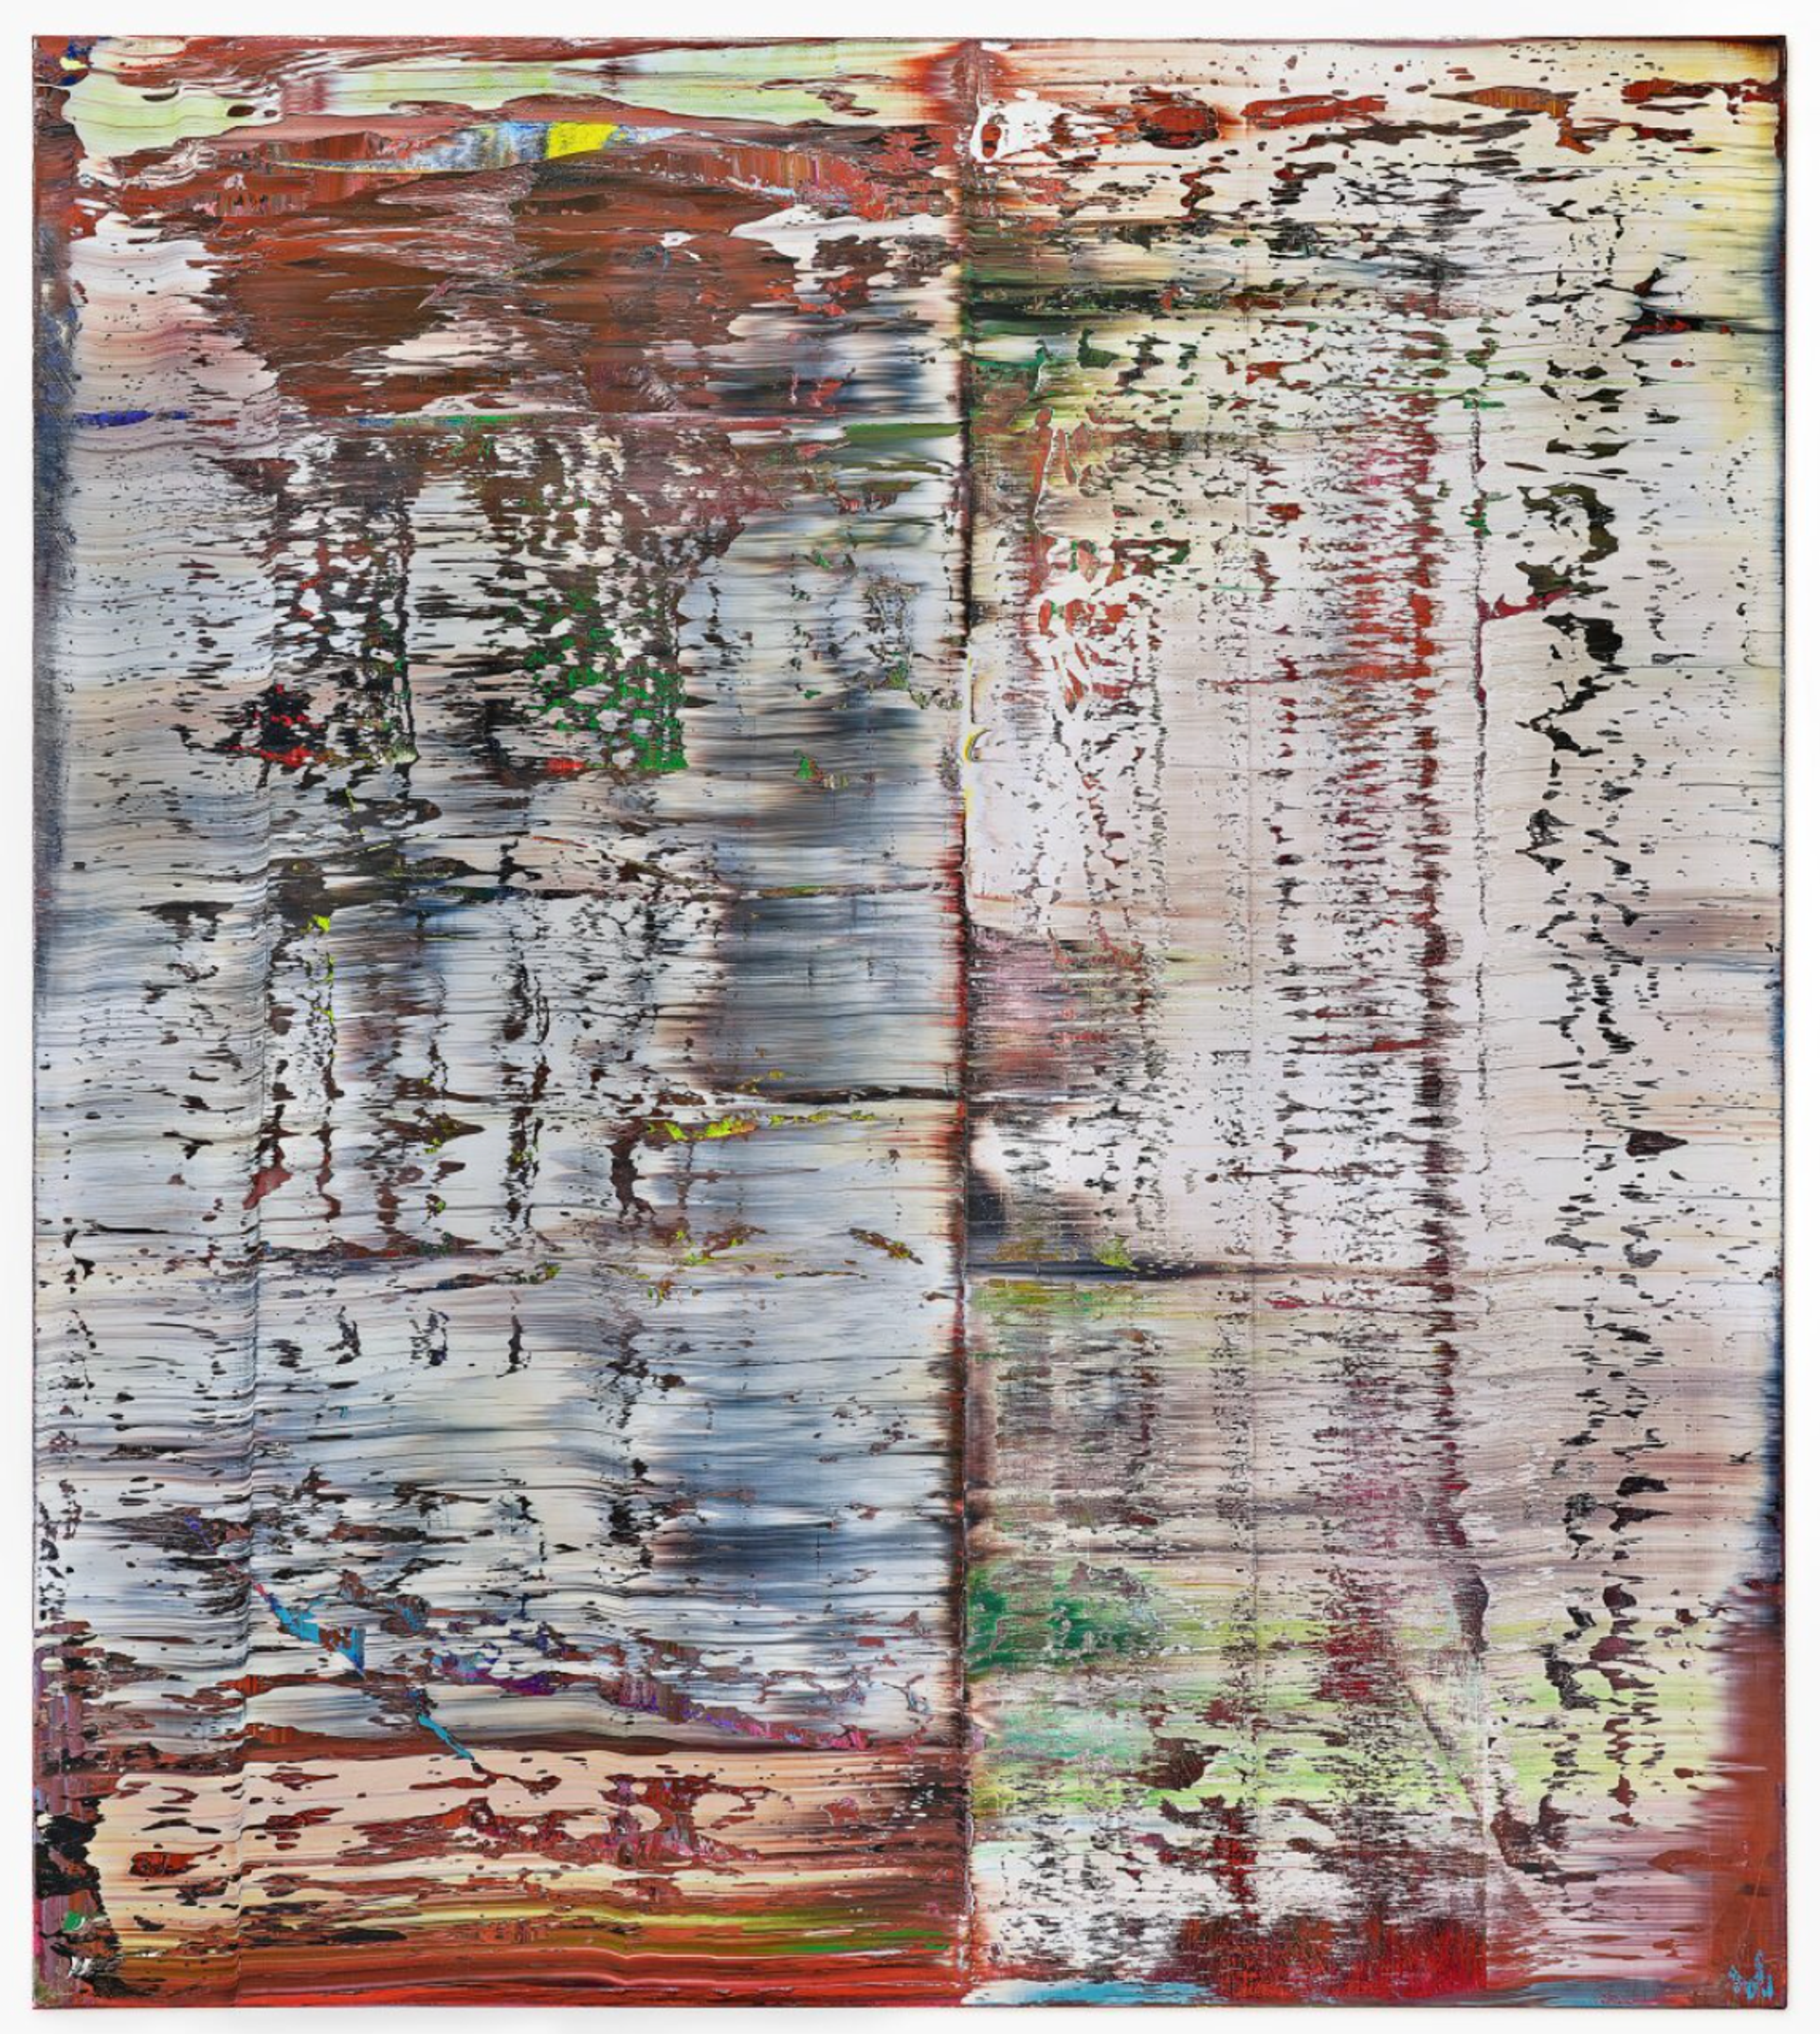 Painting by Gerhard Richter, depicting streaks of white, pale blue, green and grey over a deep red background.